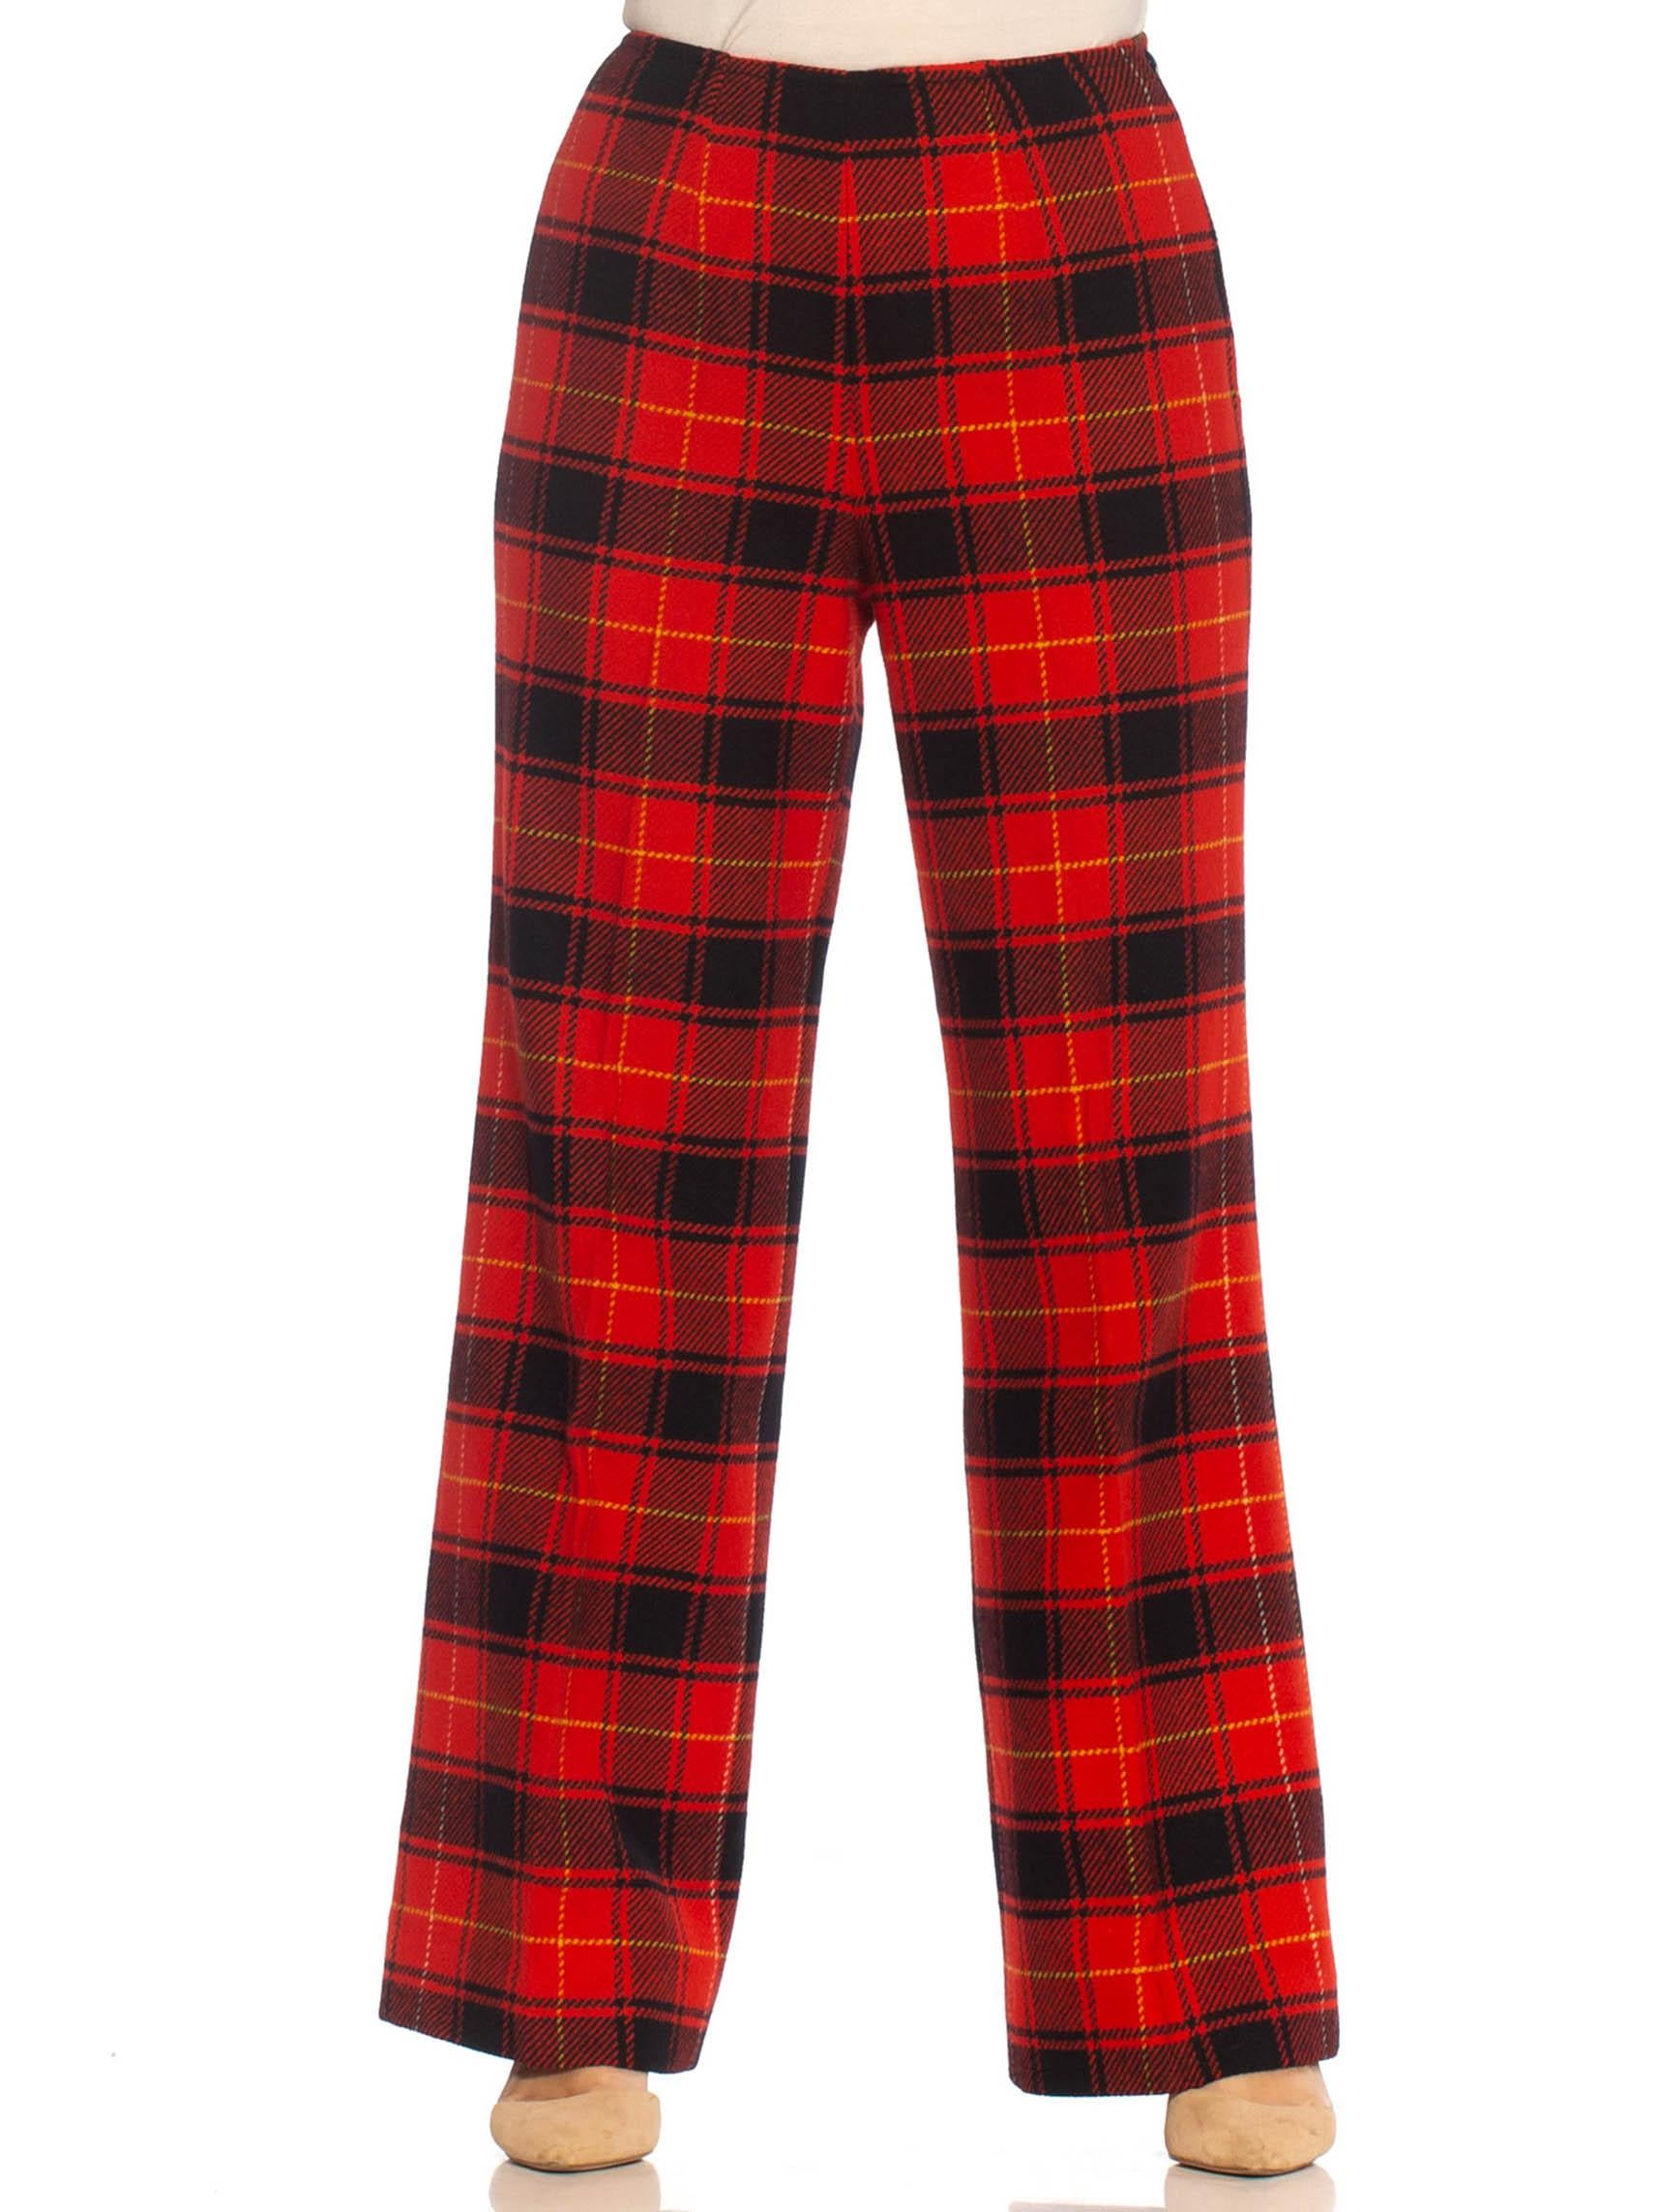 1960S PENDLETON Red & Black Plaid Wool Fully Lined, Wide Lapel Pant Suit For Sale 3